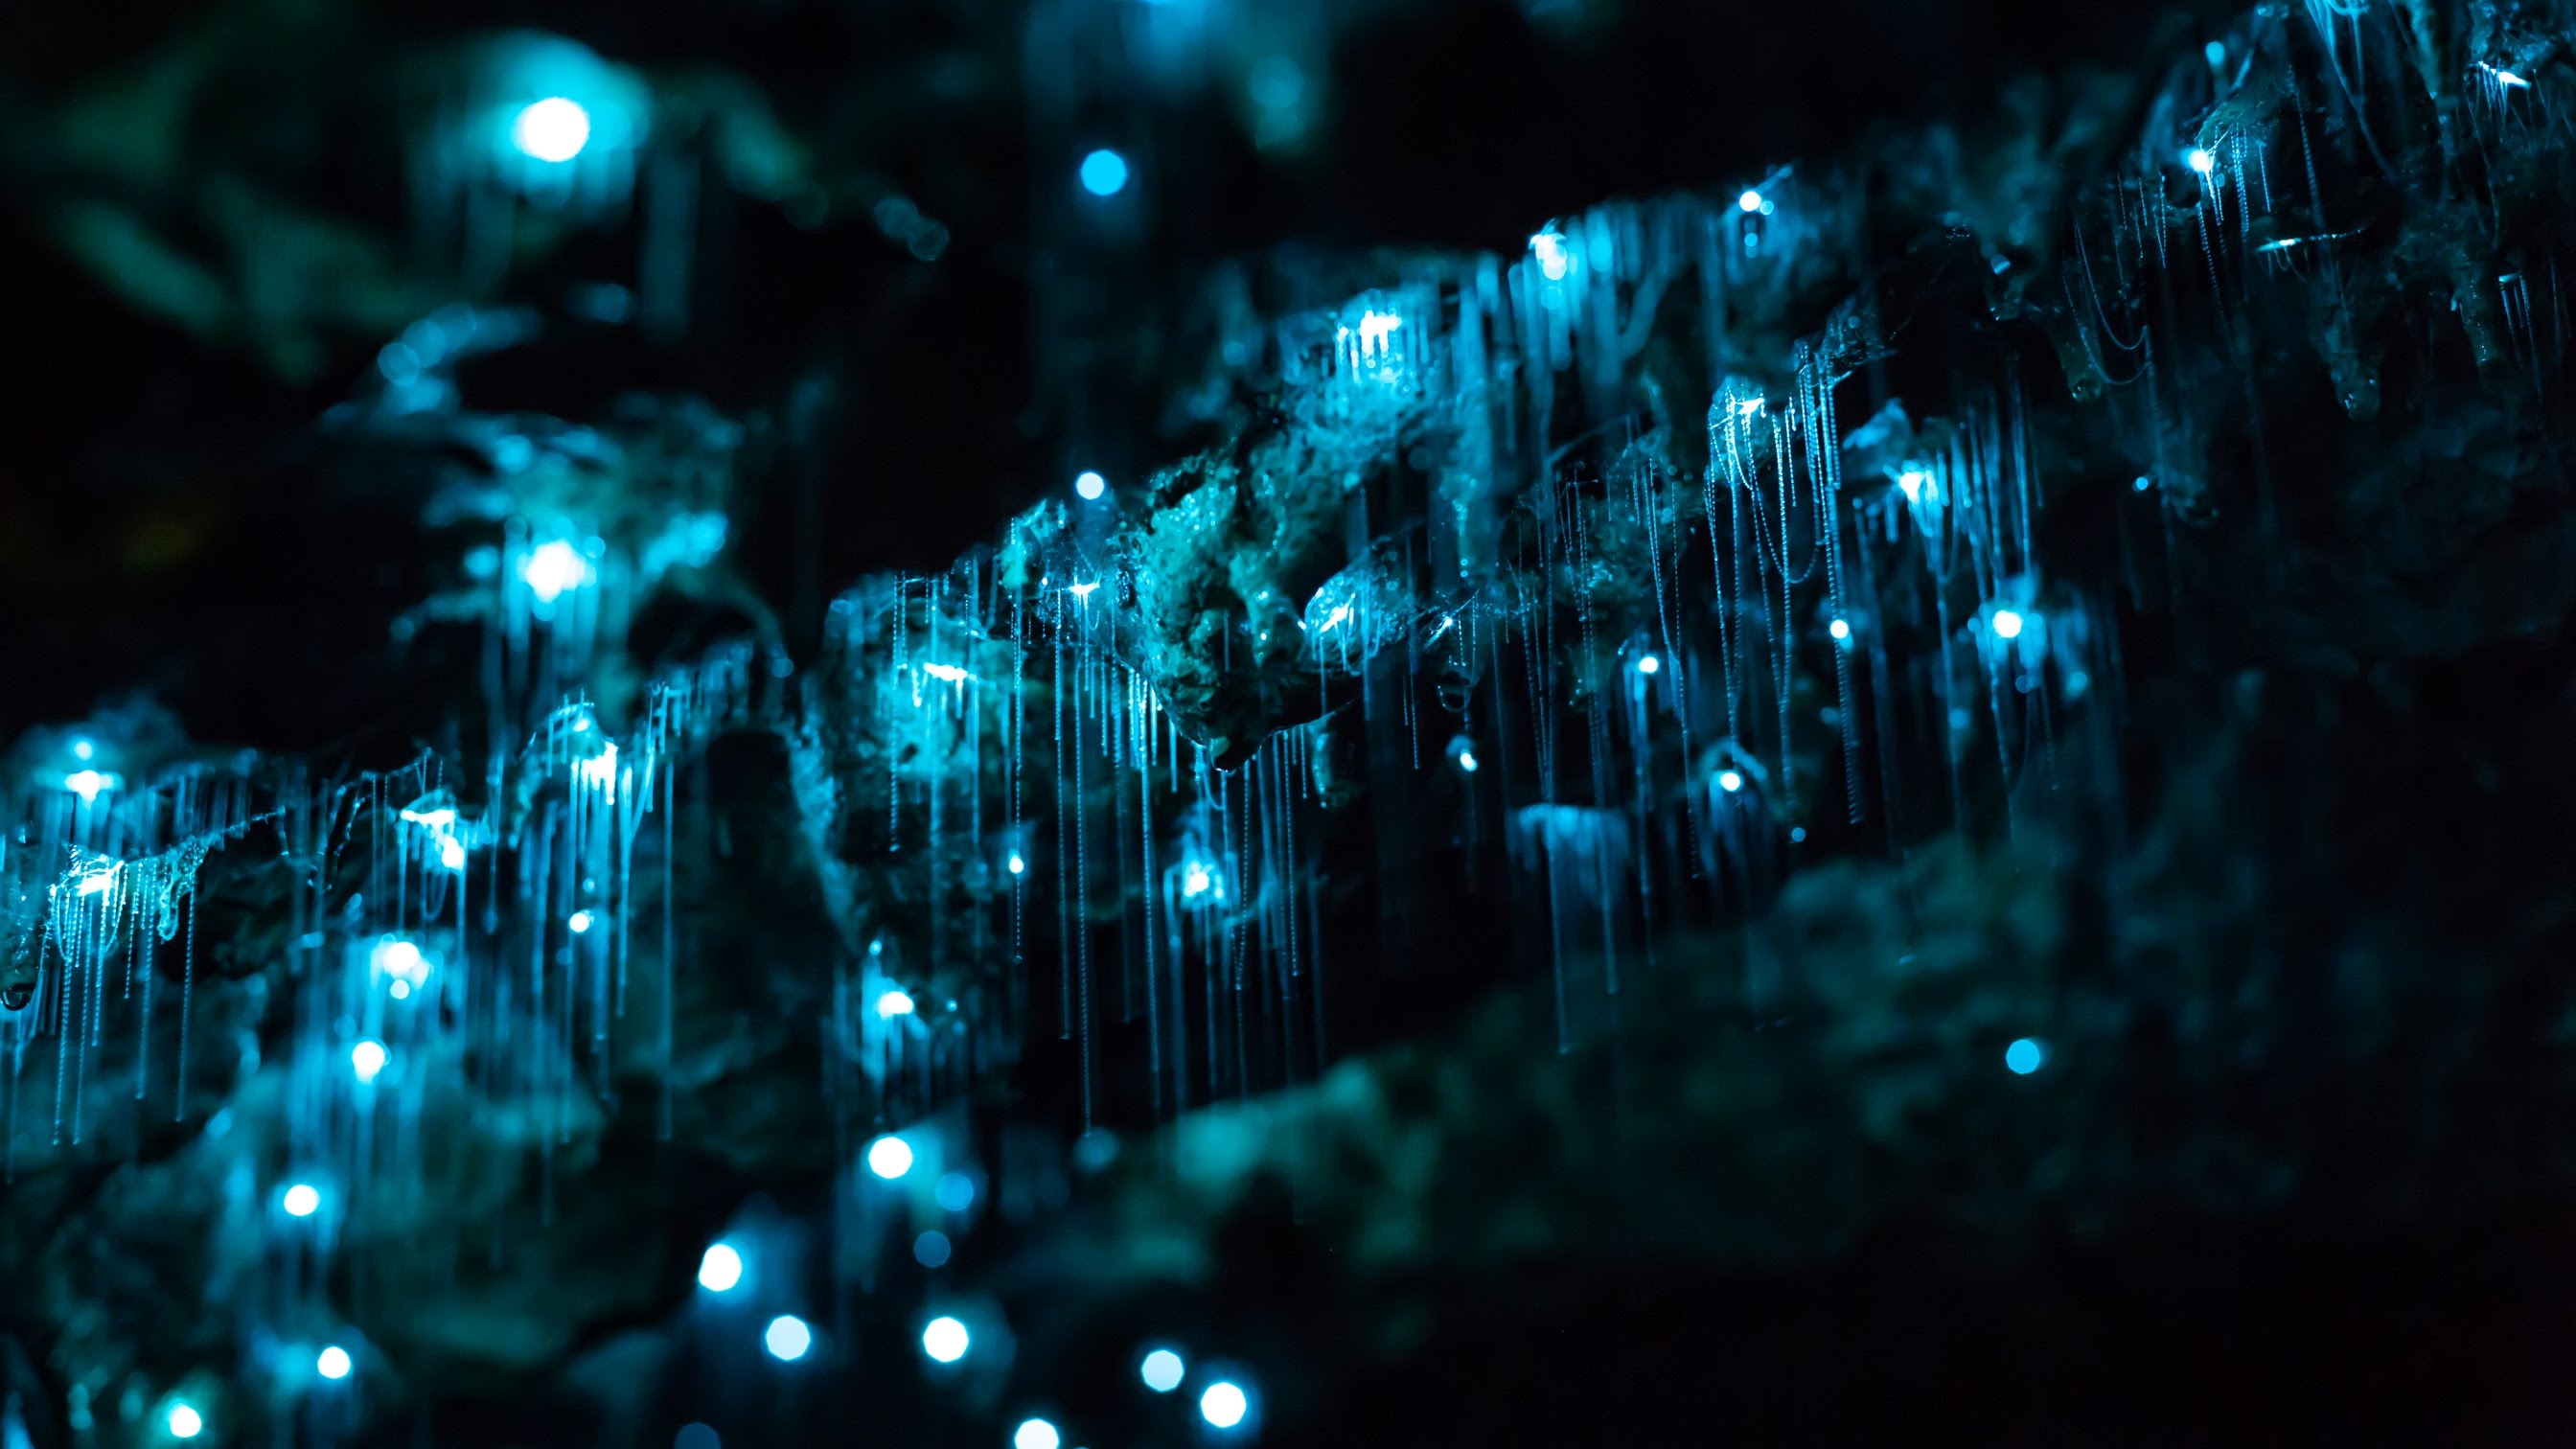 Glowworms in Motion - A Time-lapse of NZ's Glowworm Caves in 4K ...